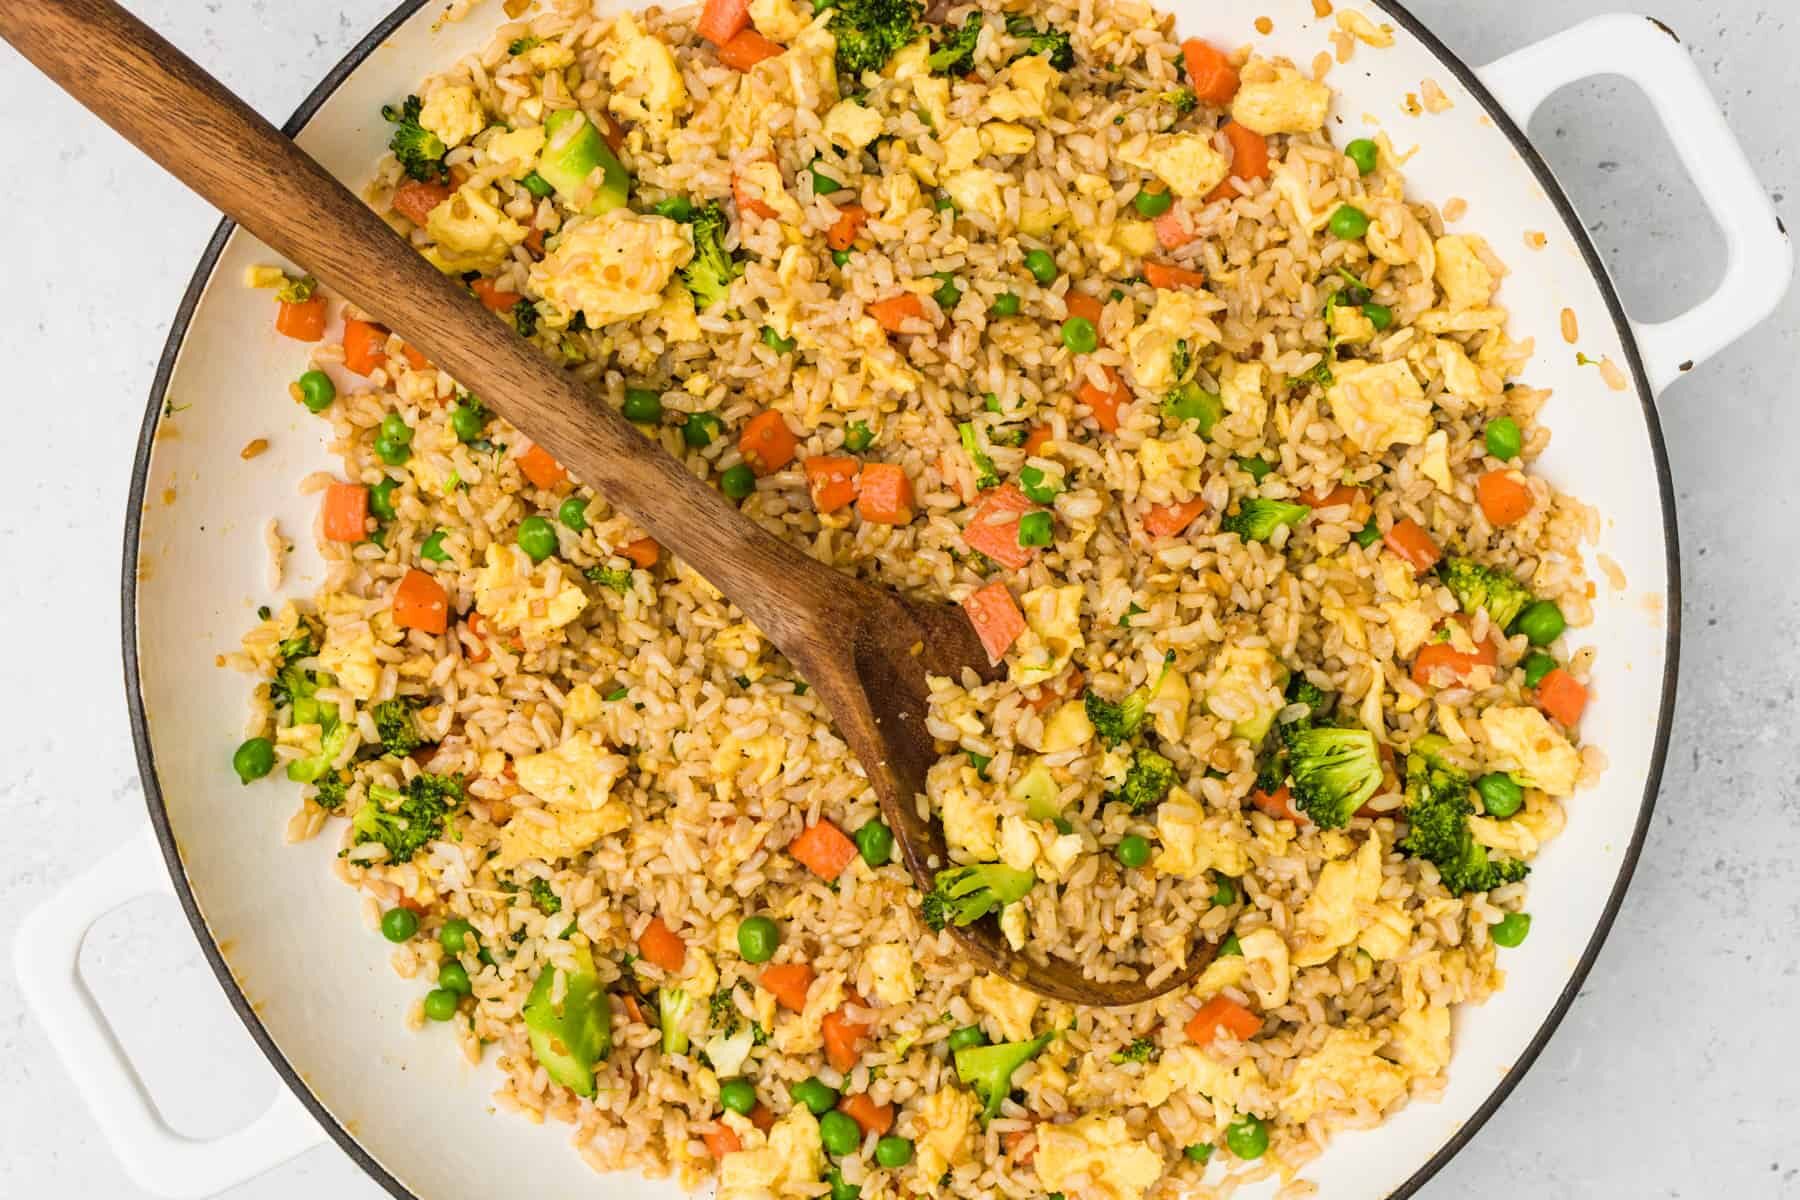 Skillet of egg fried rice with wooden spoon ready to serve.